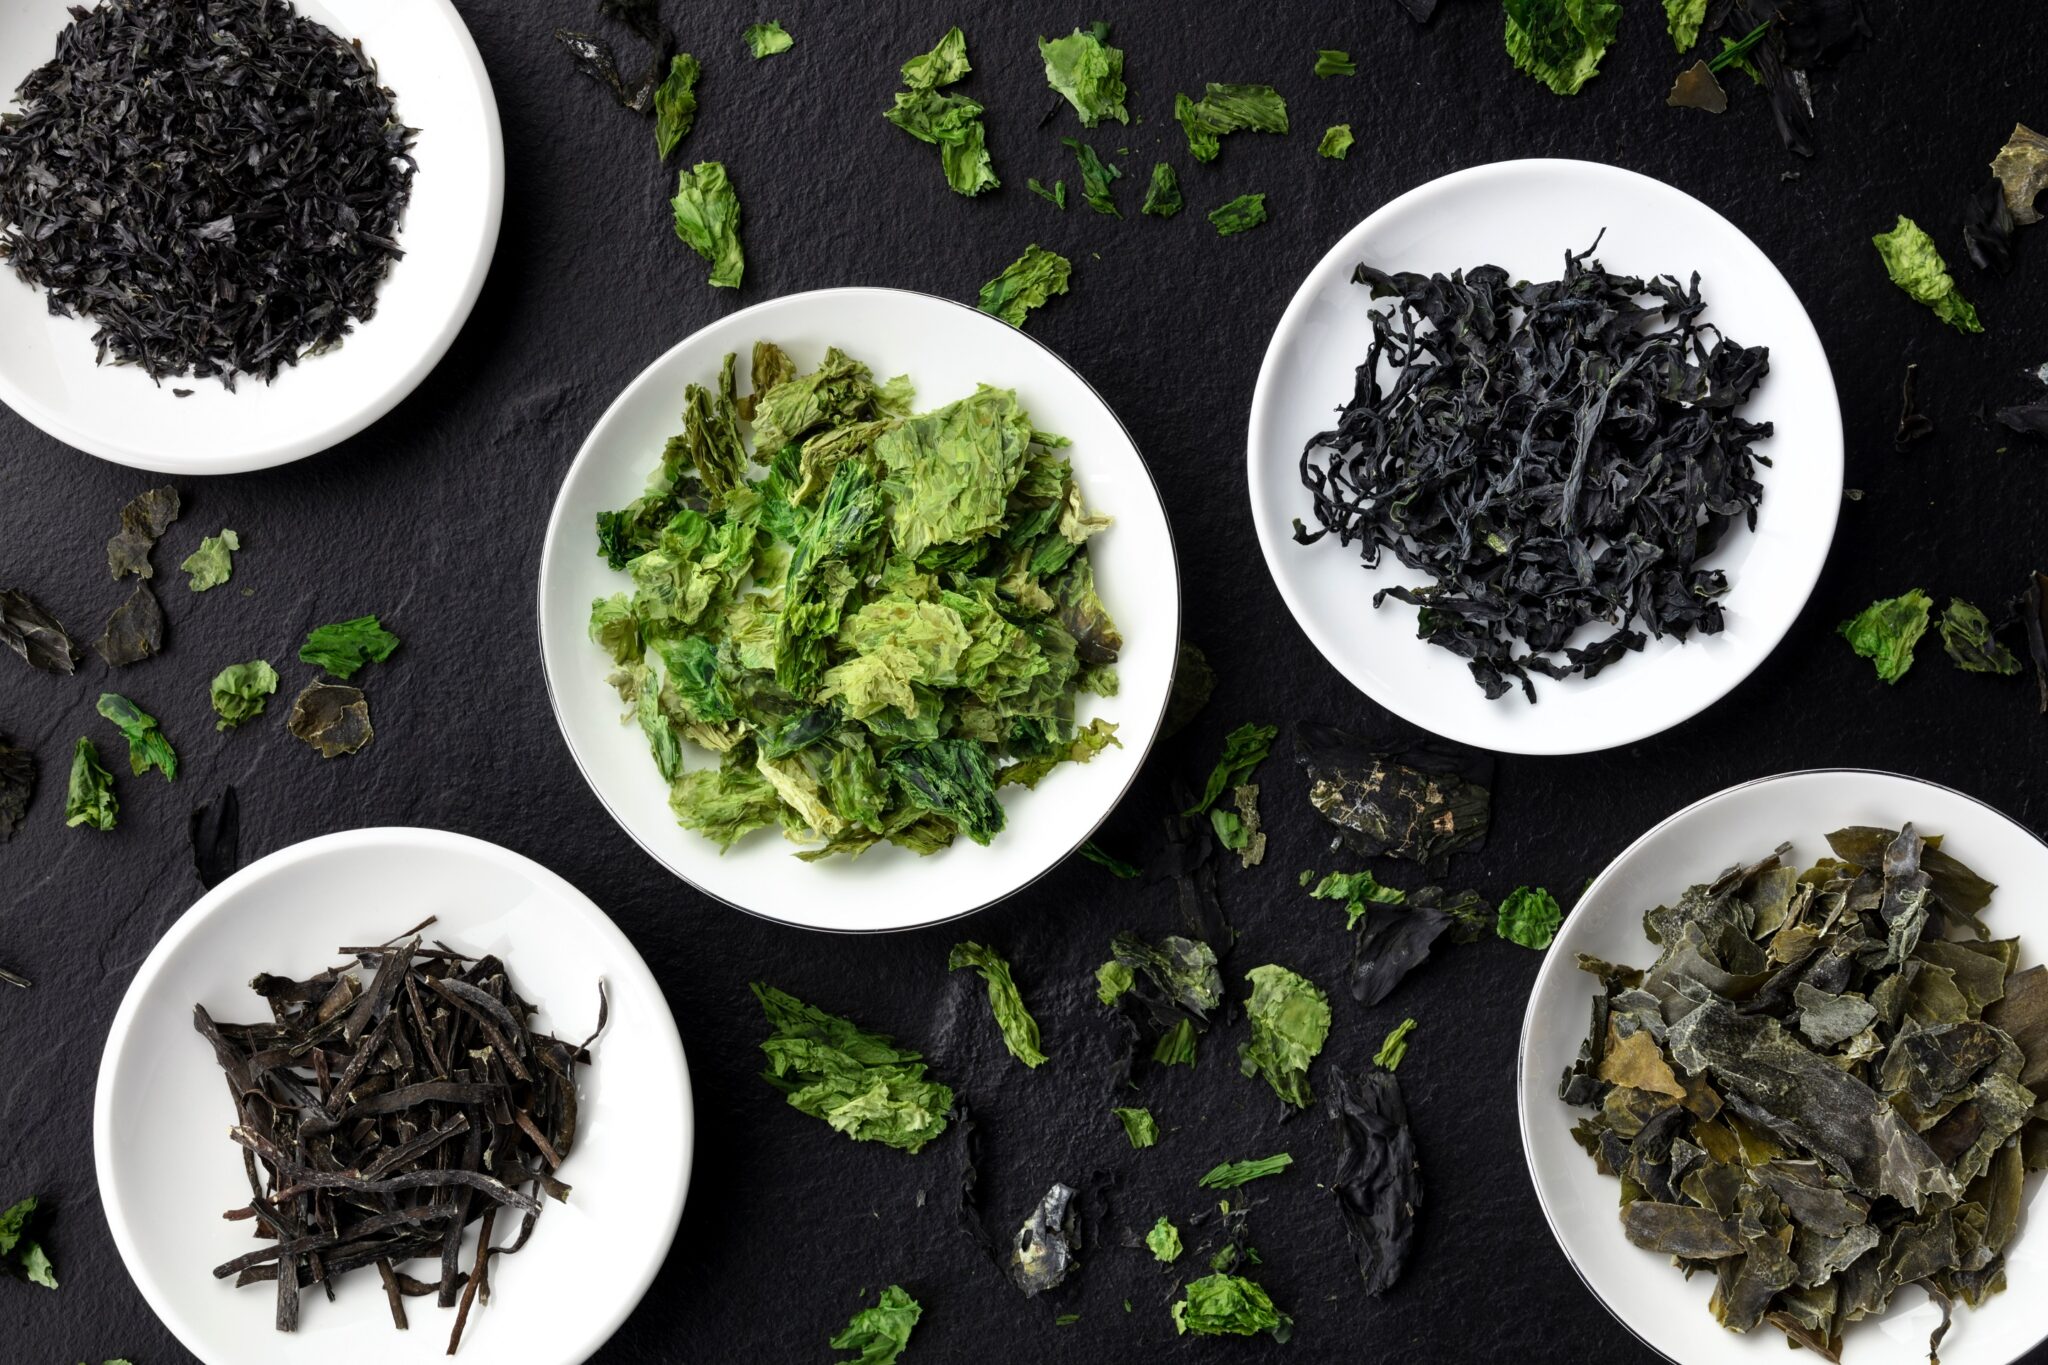 Tomorrow seaweed will take center stage on our plate: here's why.